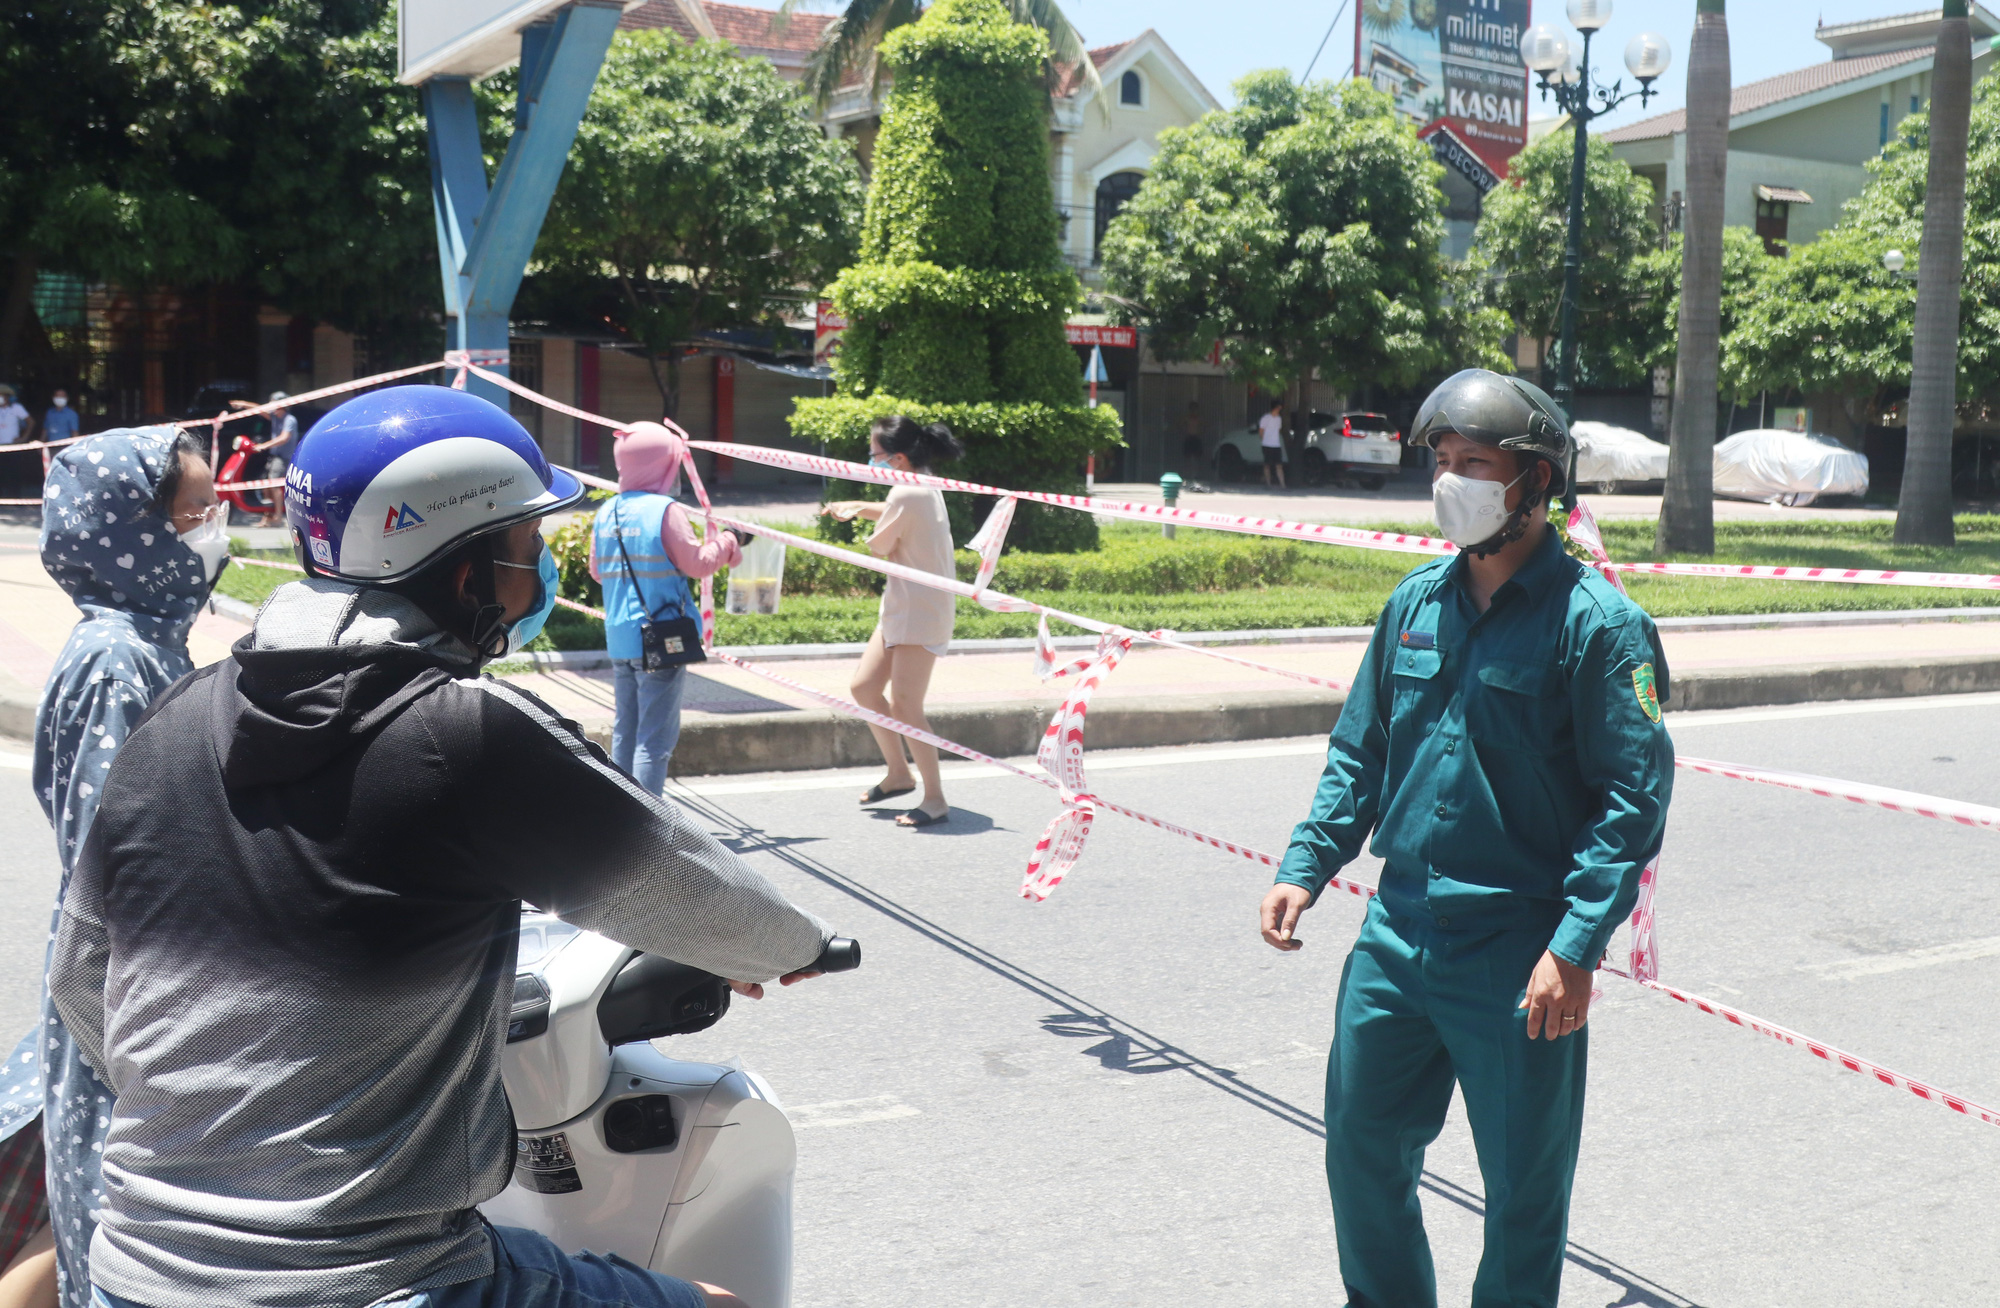 Days-long motorbike trips the only option for stranded Vietnamese to return home amidst pandemic